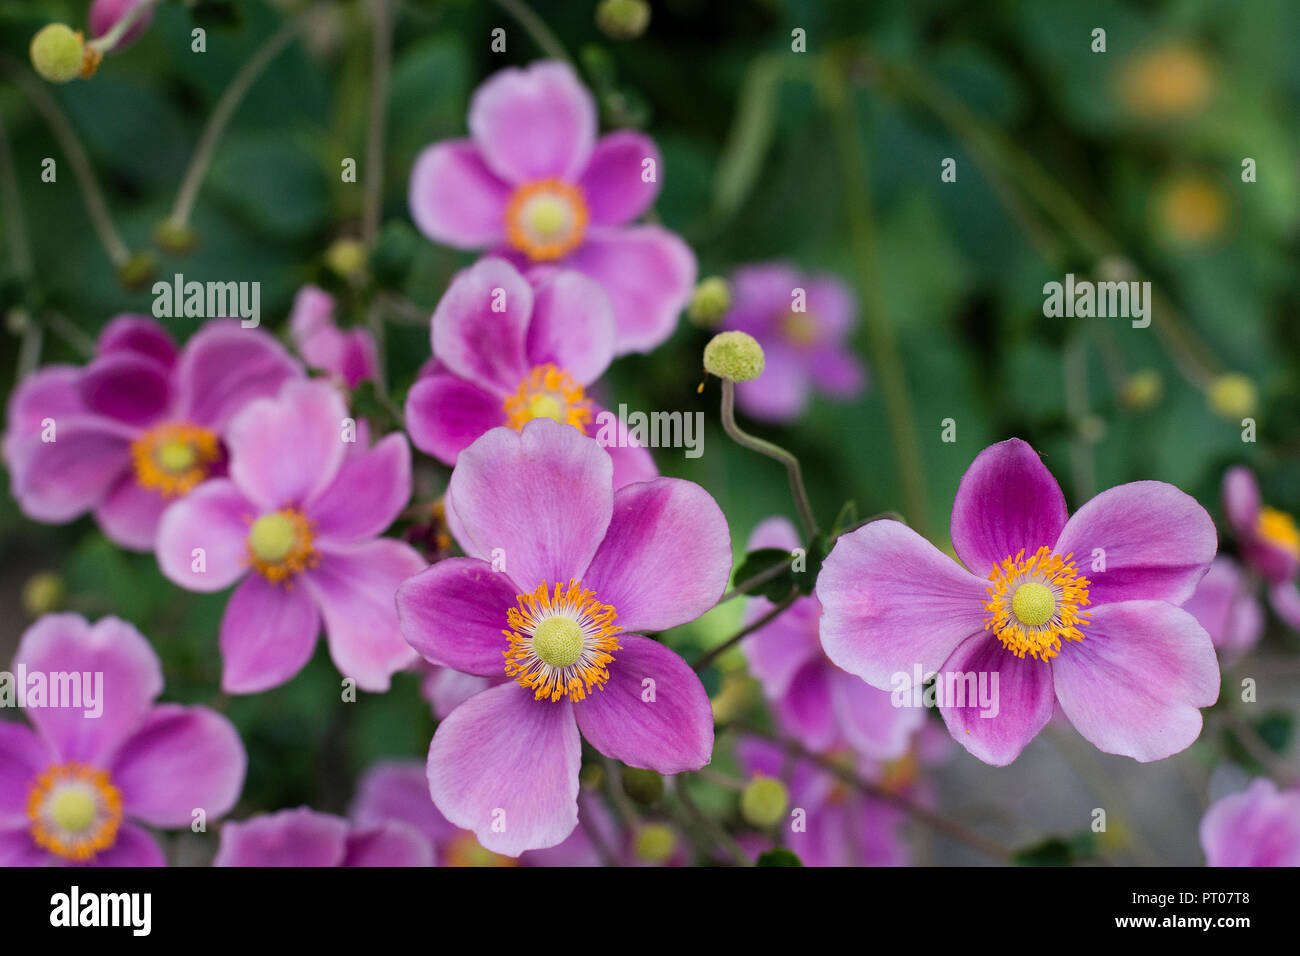 Flowers of Anemone hupehensis japonica Stock Photo